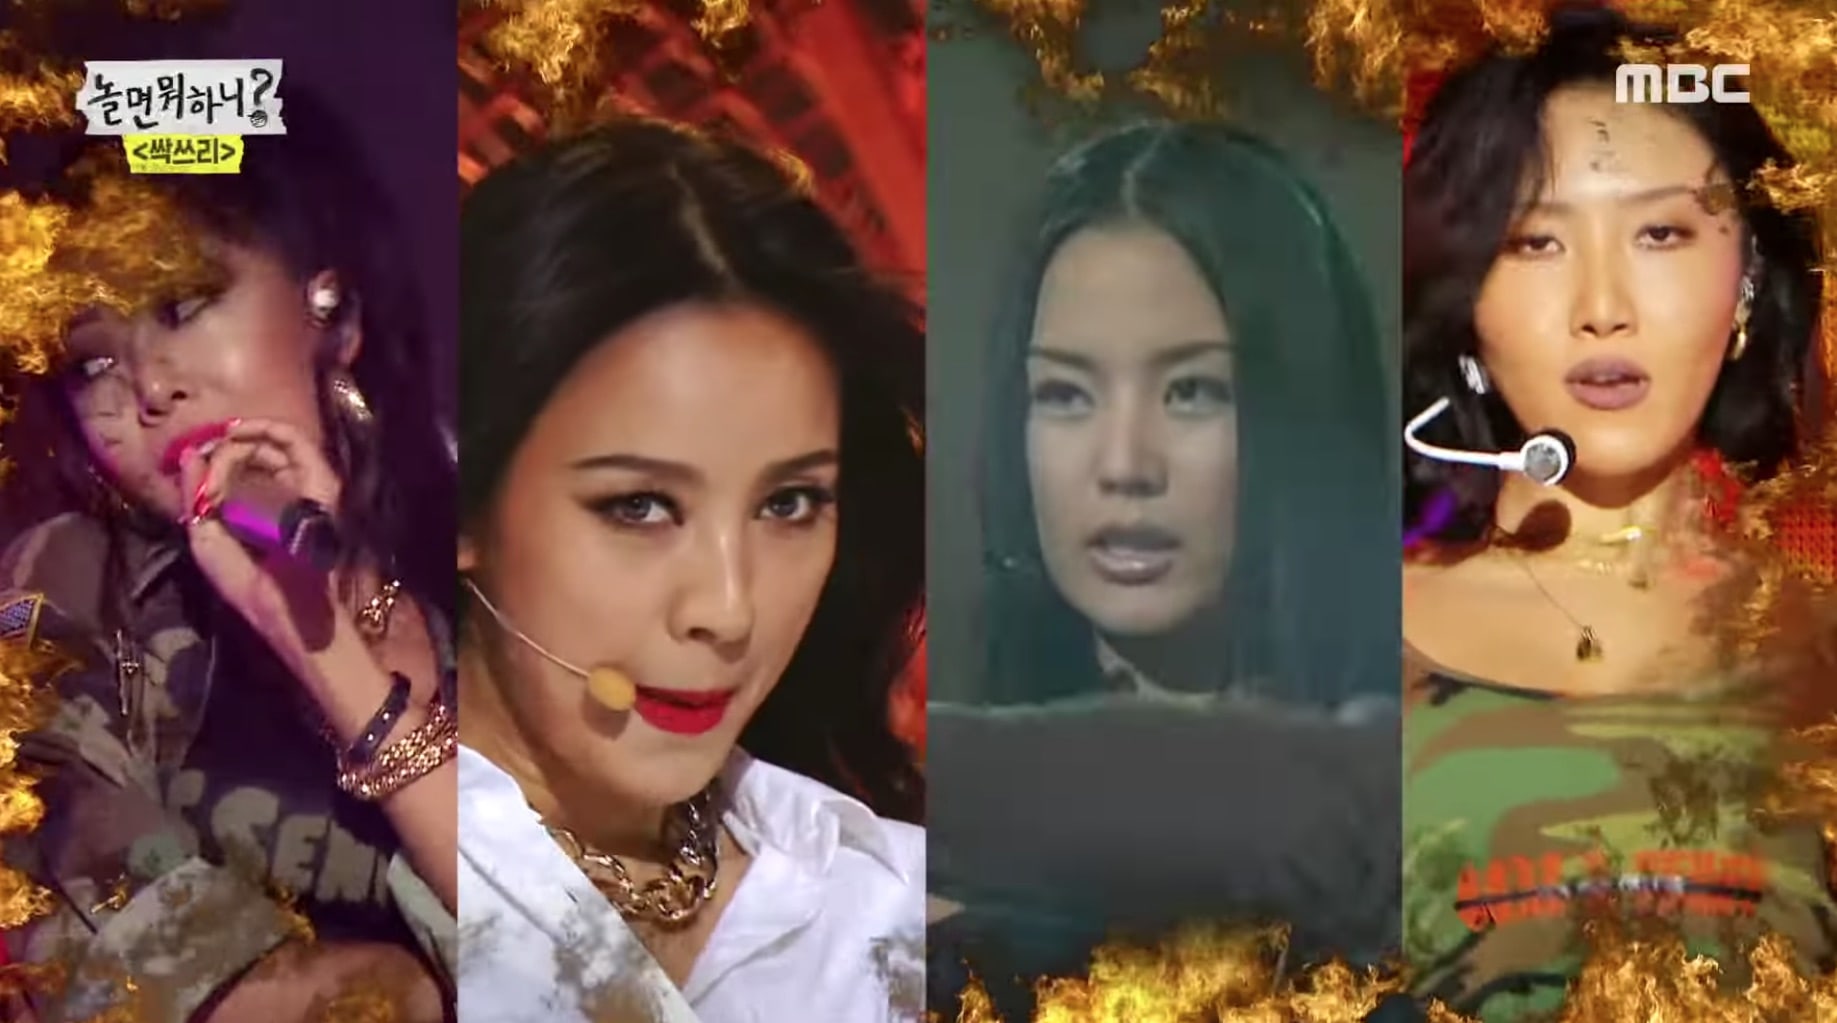 lee-hyori-reveals-girl-group-lineup-in-her-dream-5